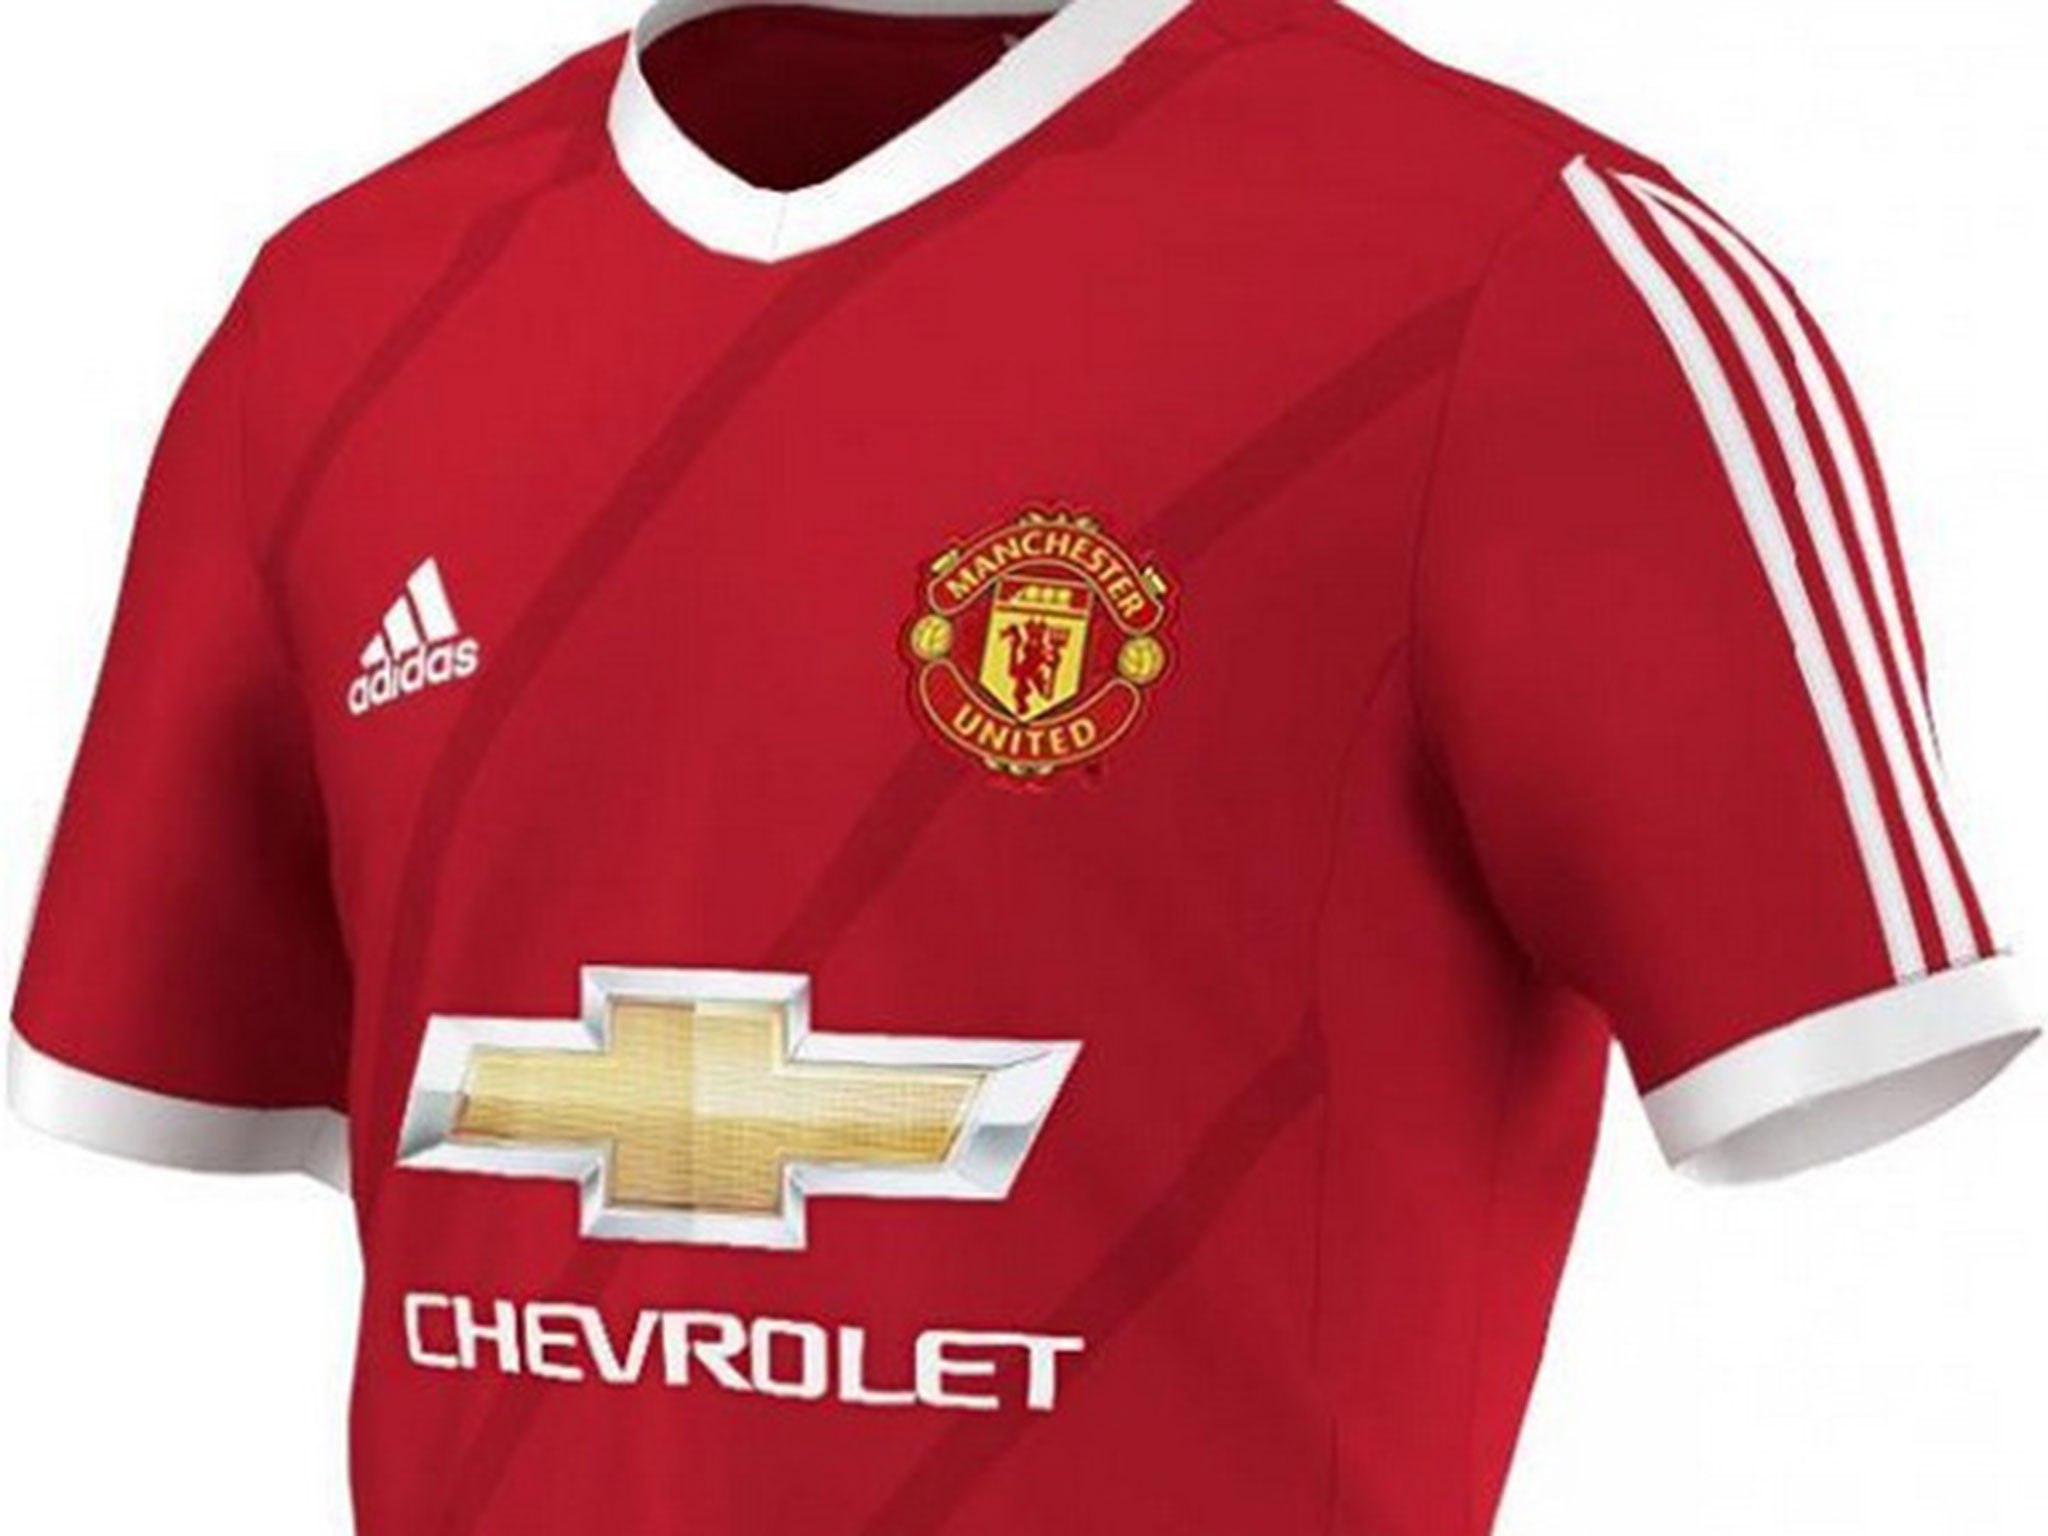 What the new home strip will look like? This image appeared online but the new kit has not yet been unveiled